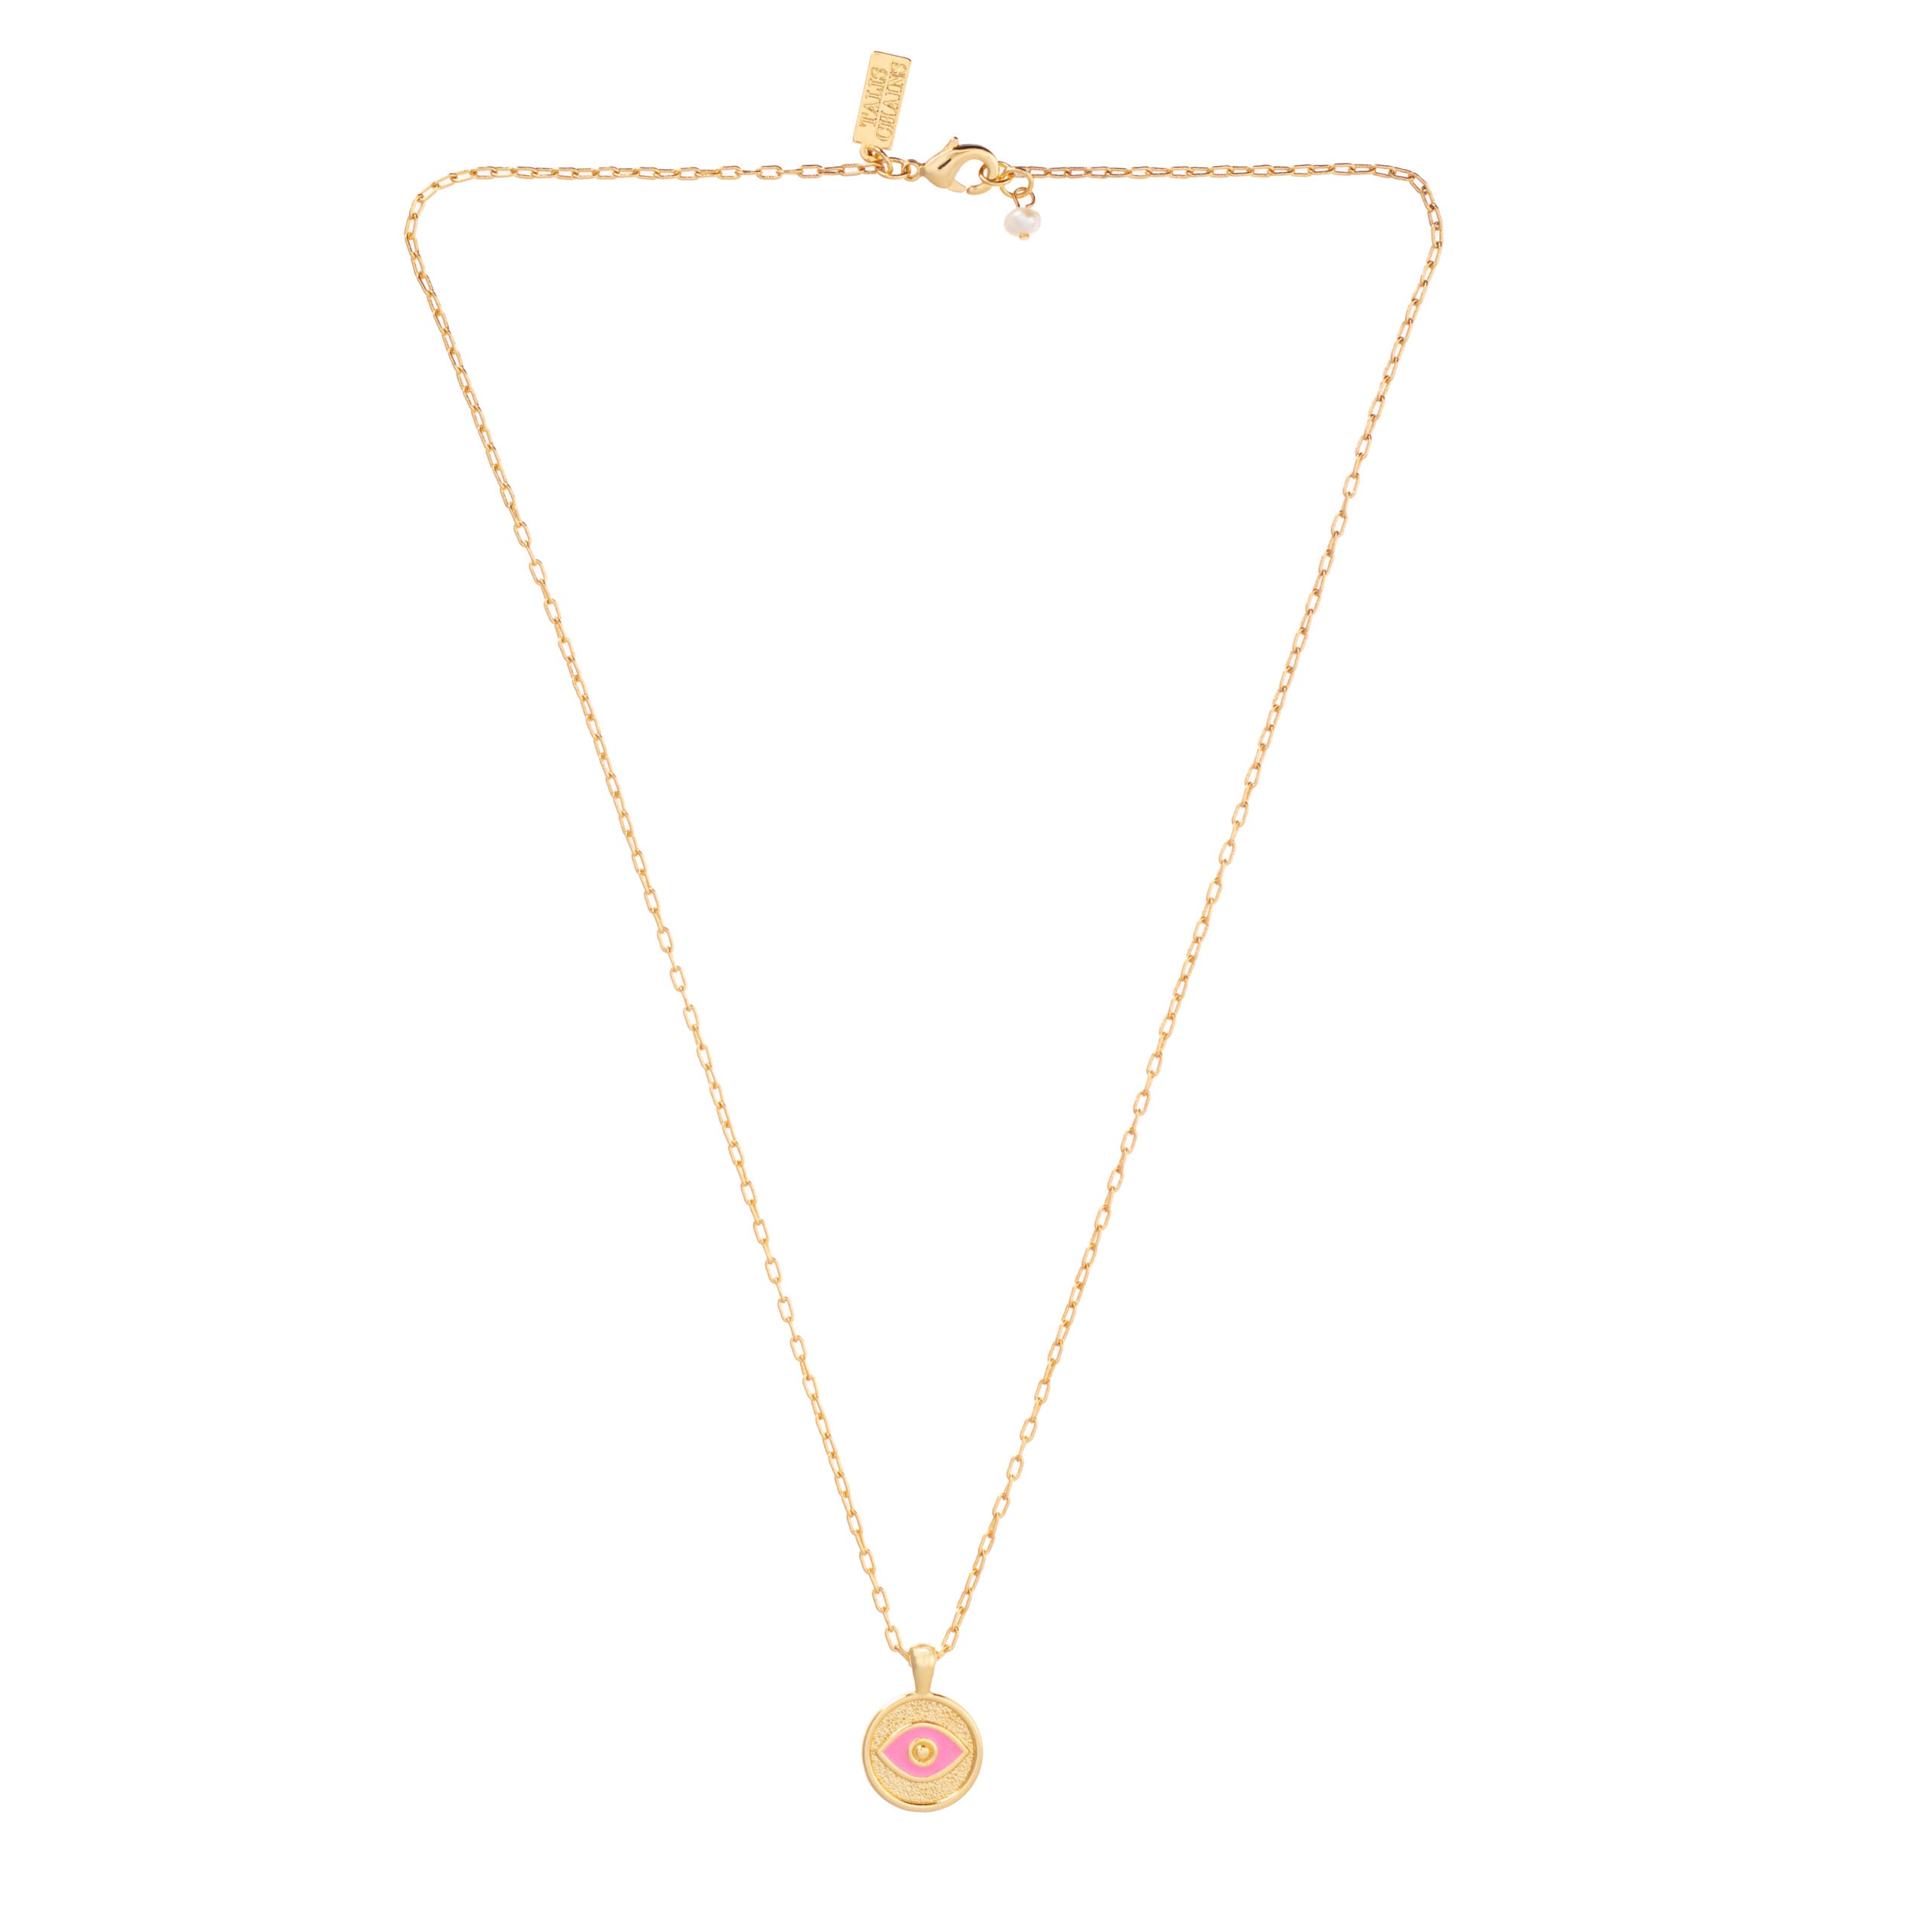 Talis Chains Evil Eye Pendant Necklace - Pink